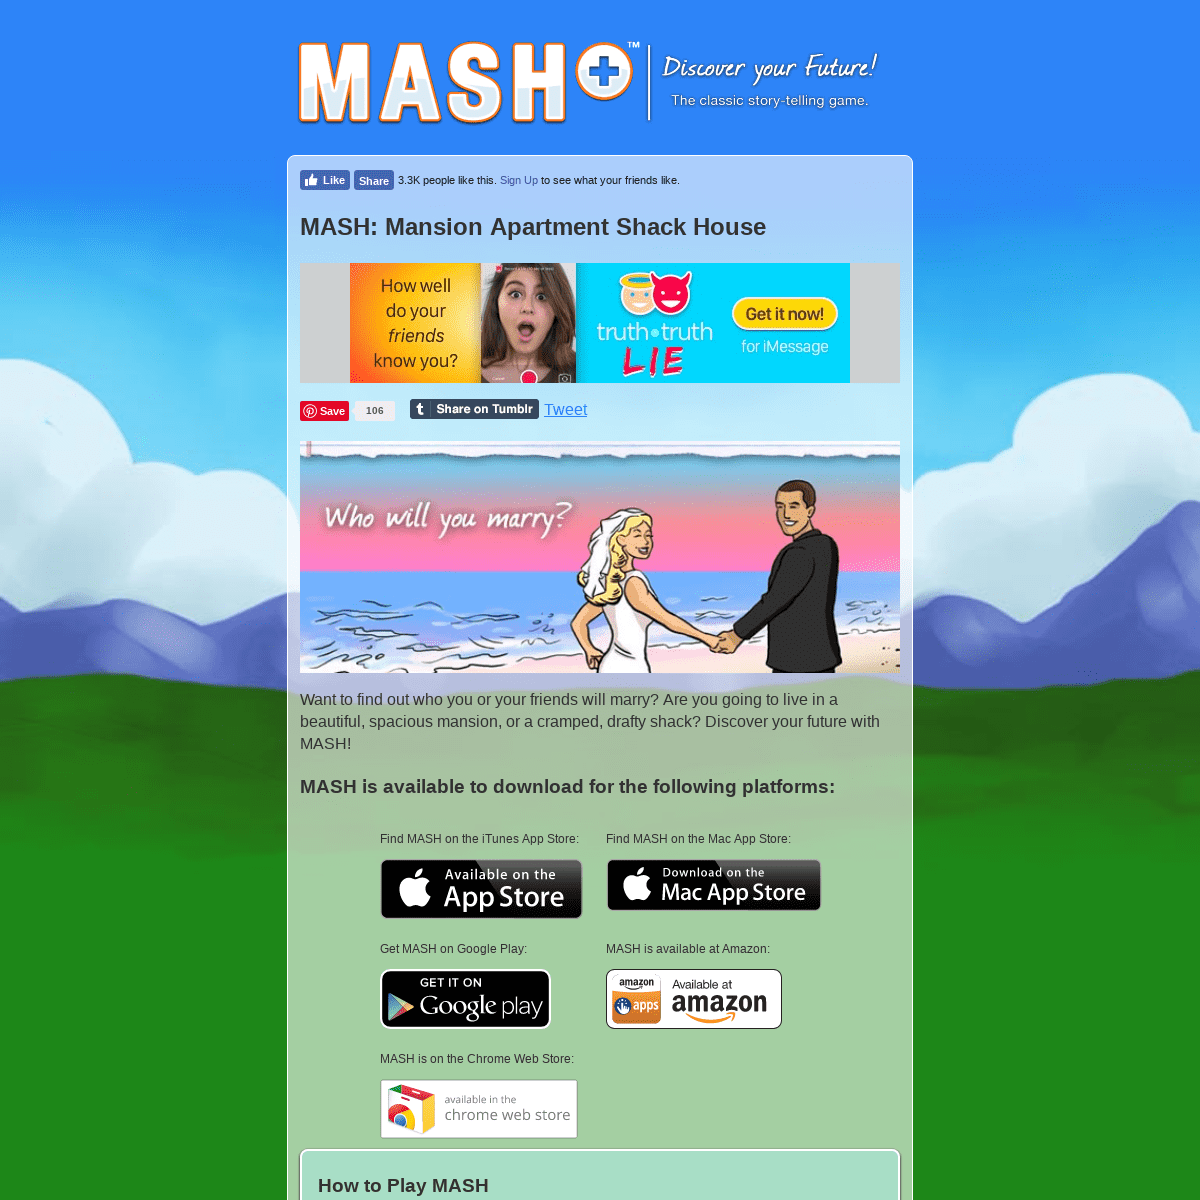 MASH Game: Discover your MASH Story Online/App | Mansion Apartment Shack House